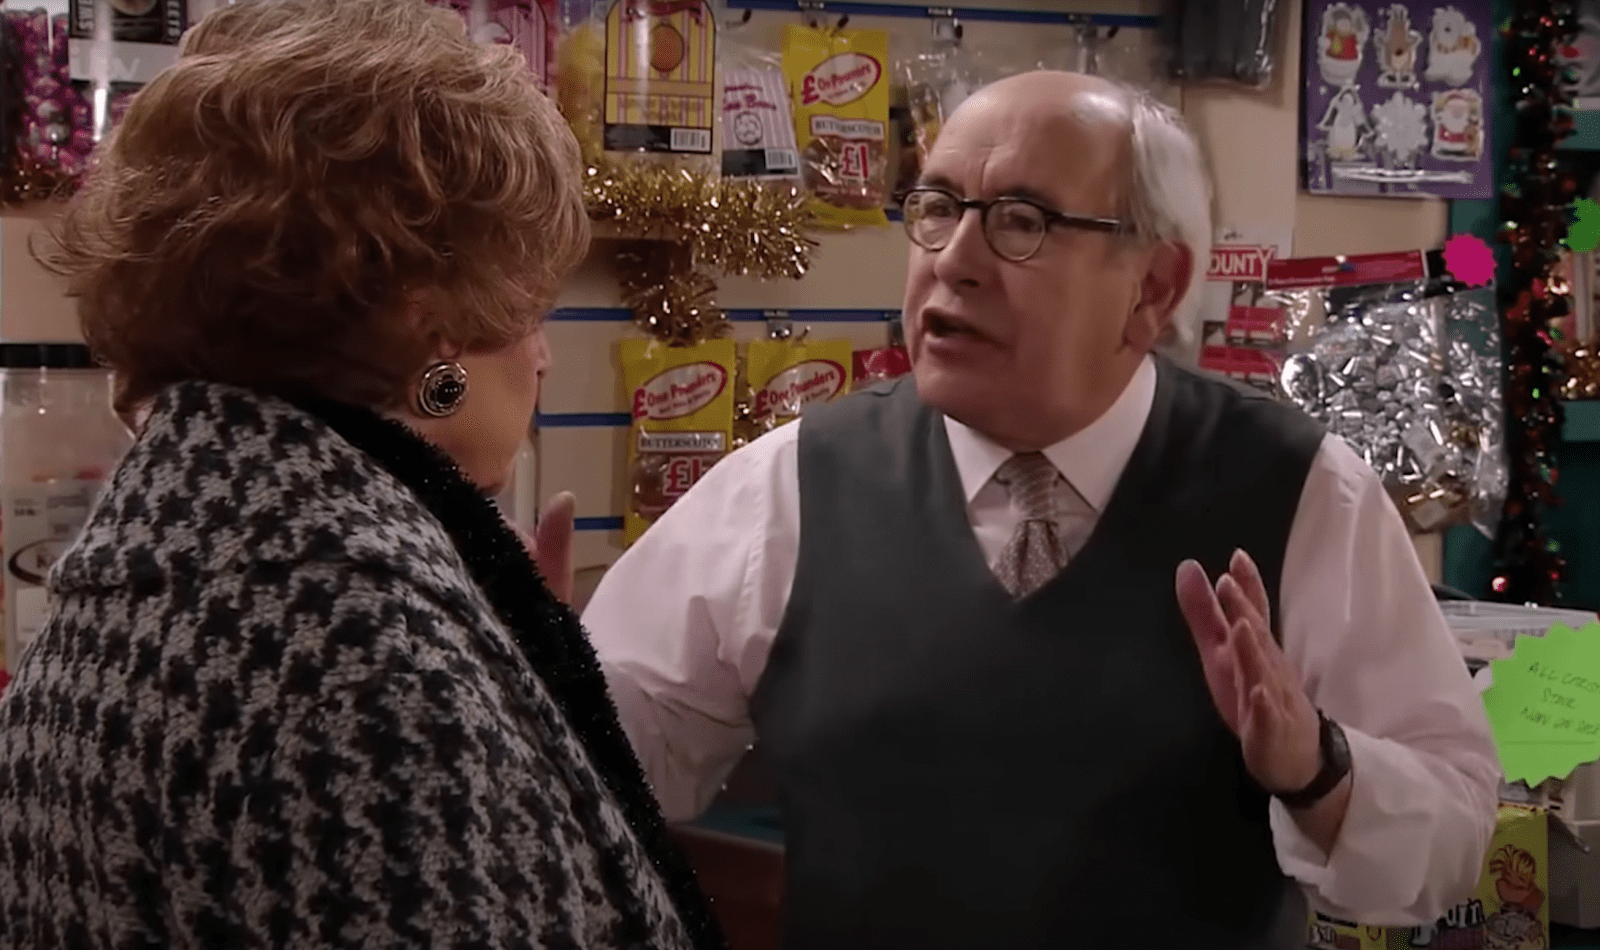 Coronation Street reveals that long-standing character Norris Cole will die next week, The Manc